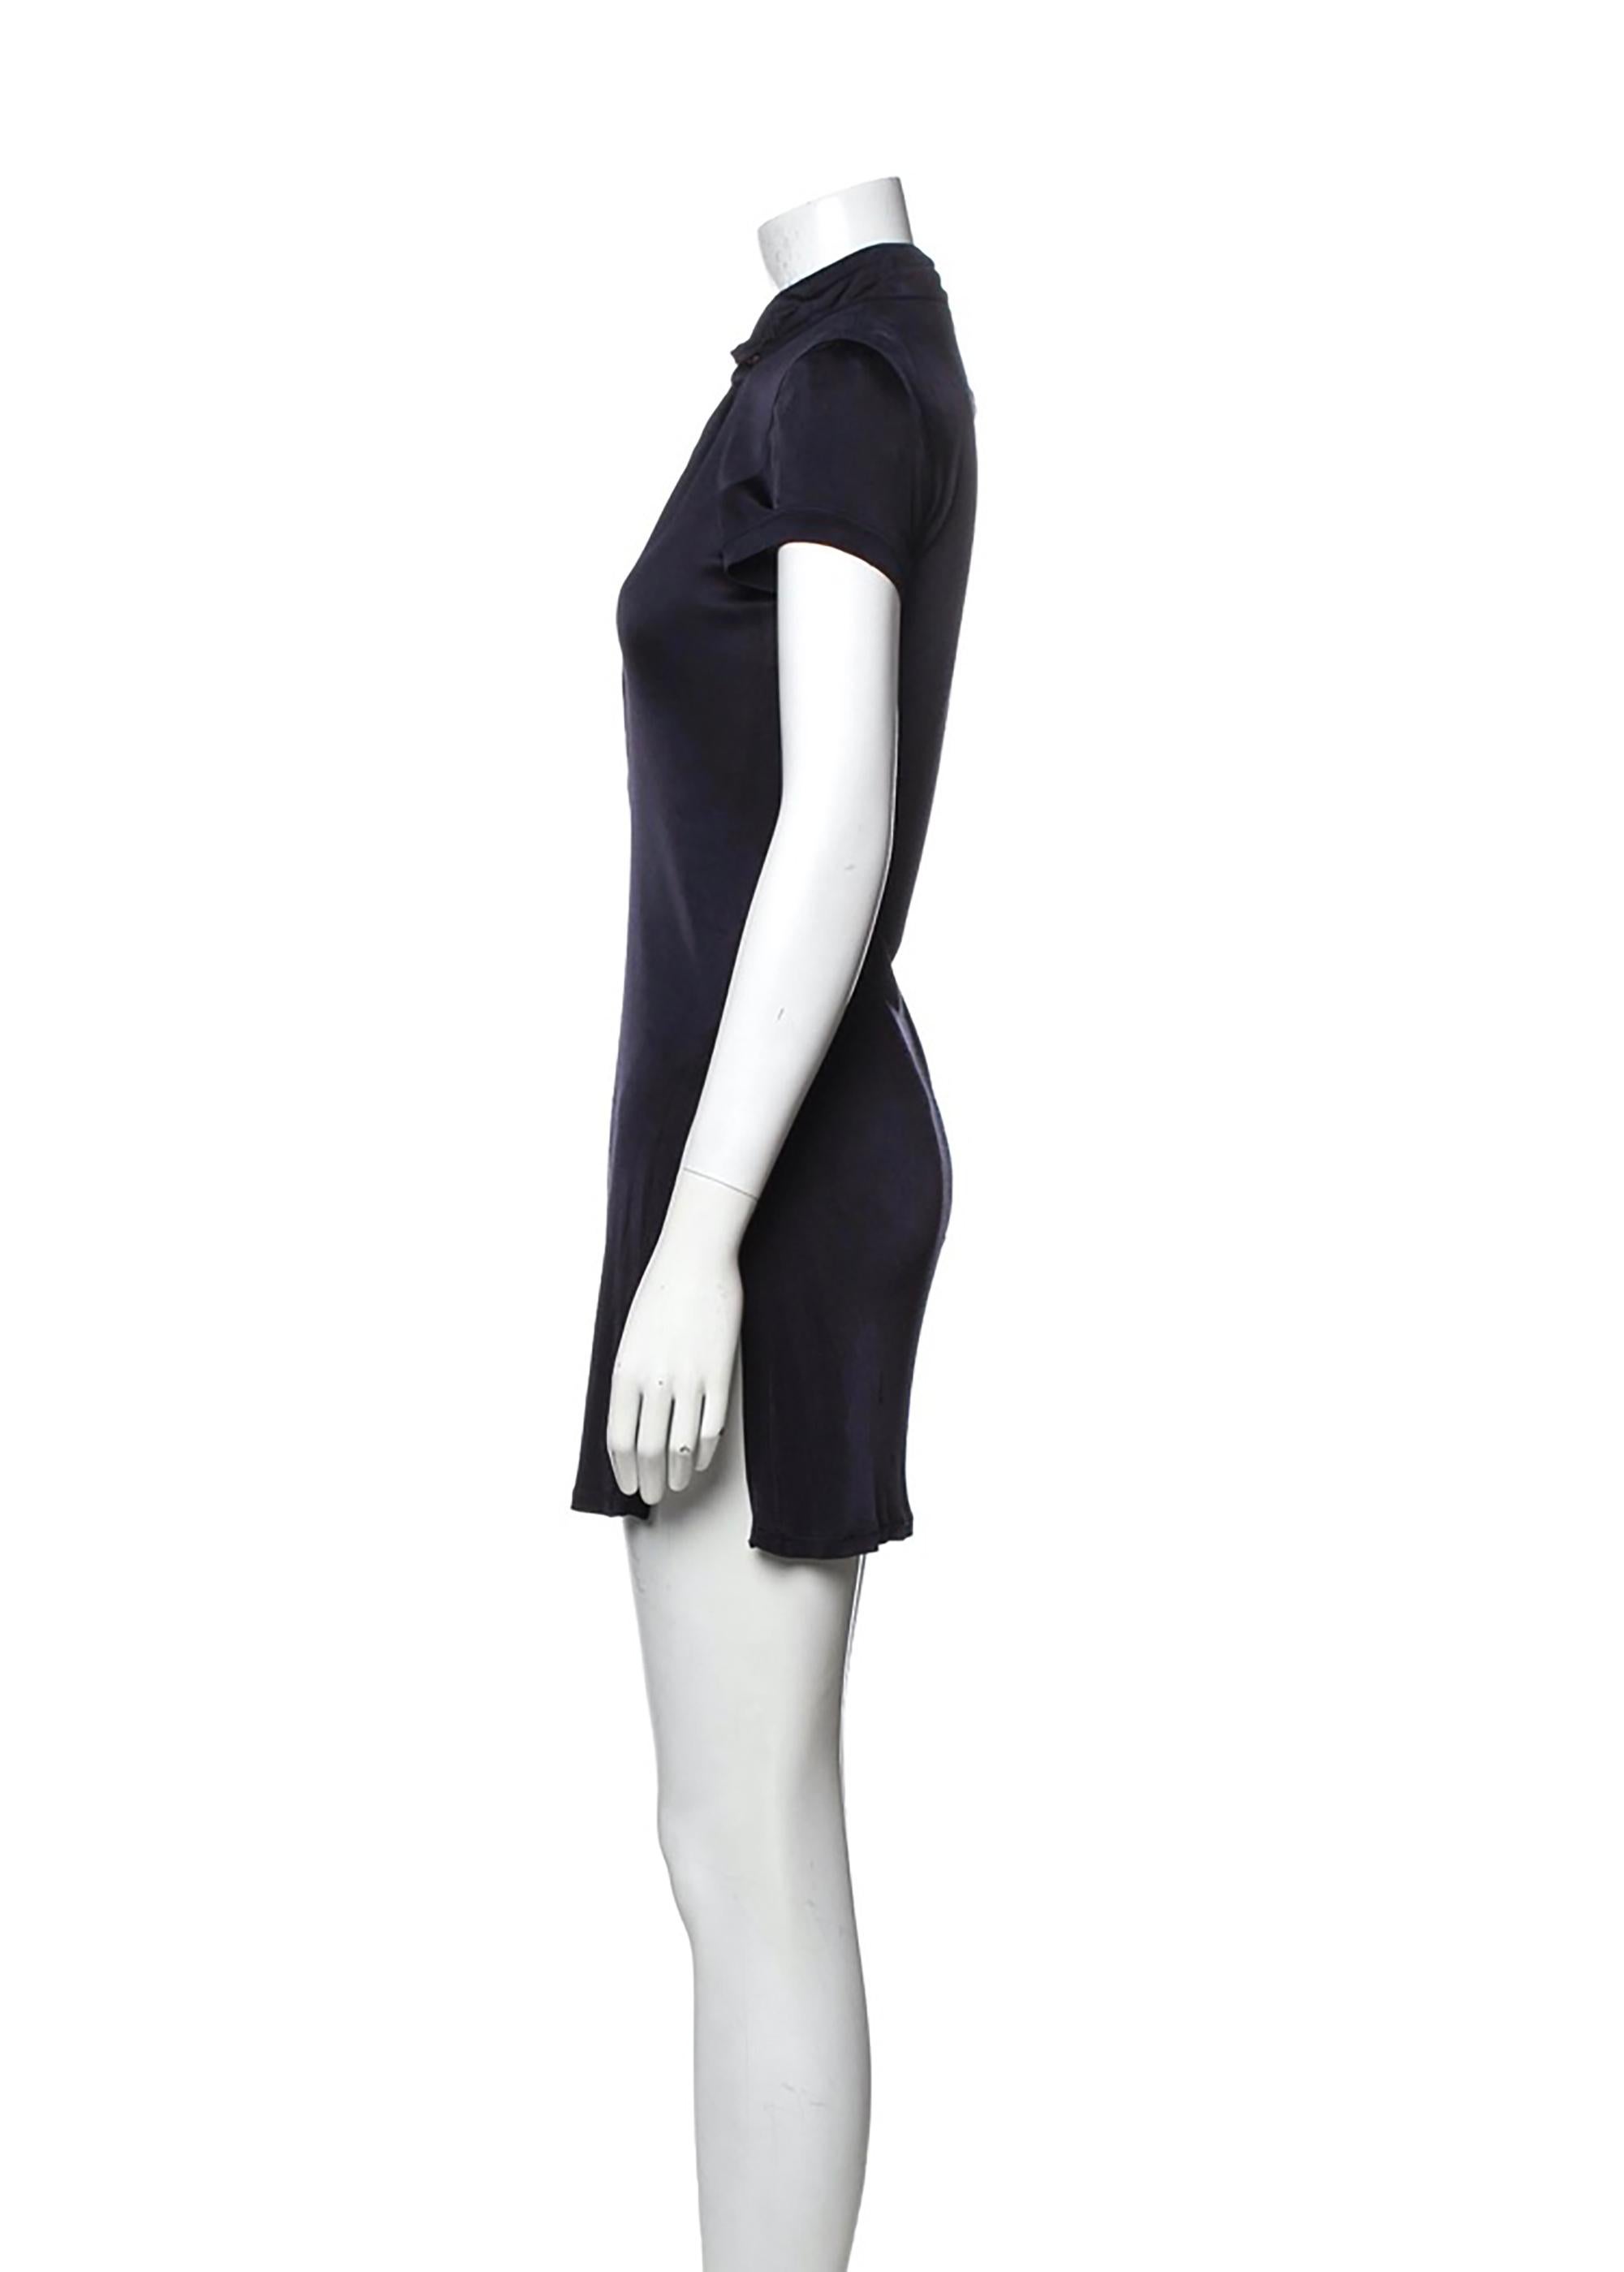 Jean Paul Gaultier stretch mini dress with mock neck from the 1990s
100% rayon 
Sz L / US 10 / IT 46
32